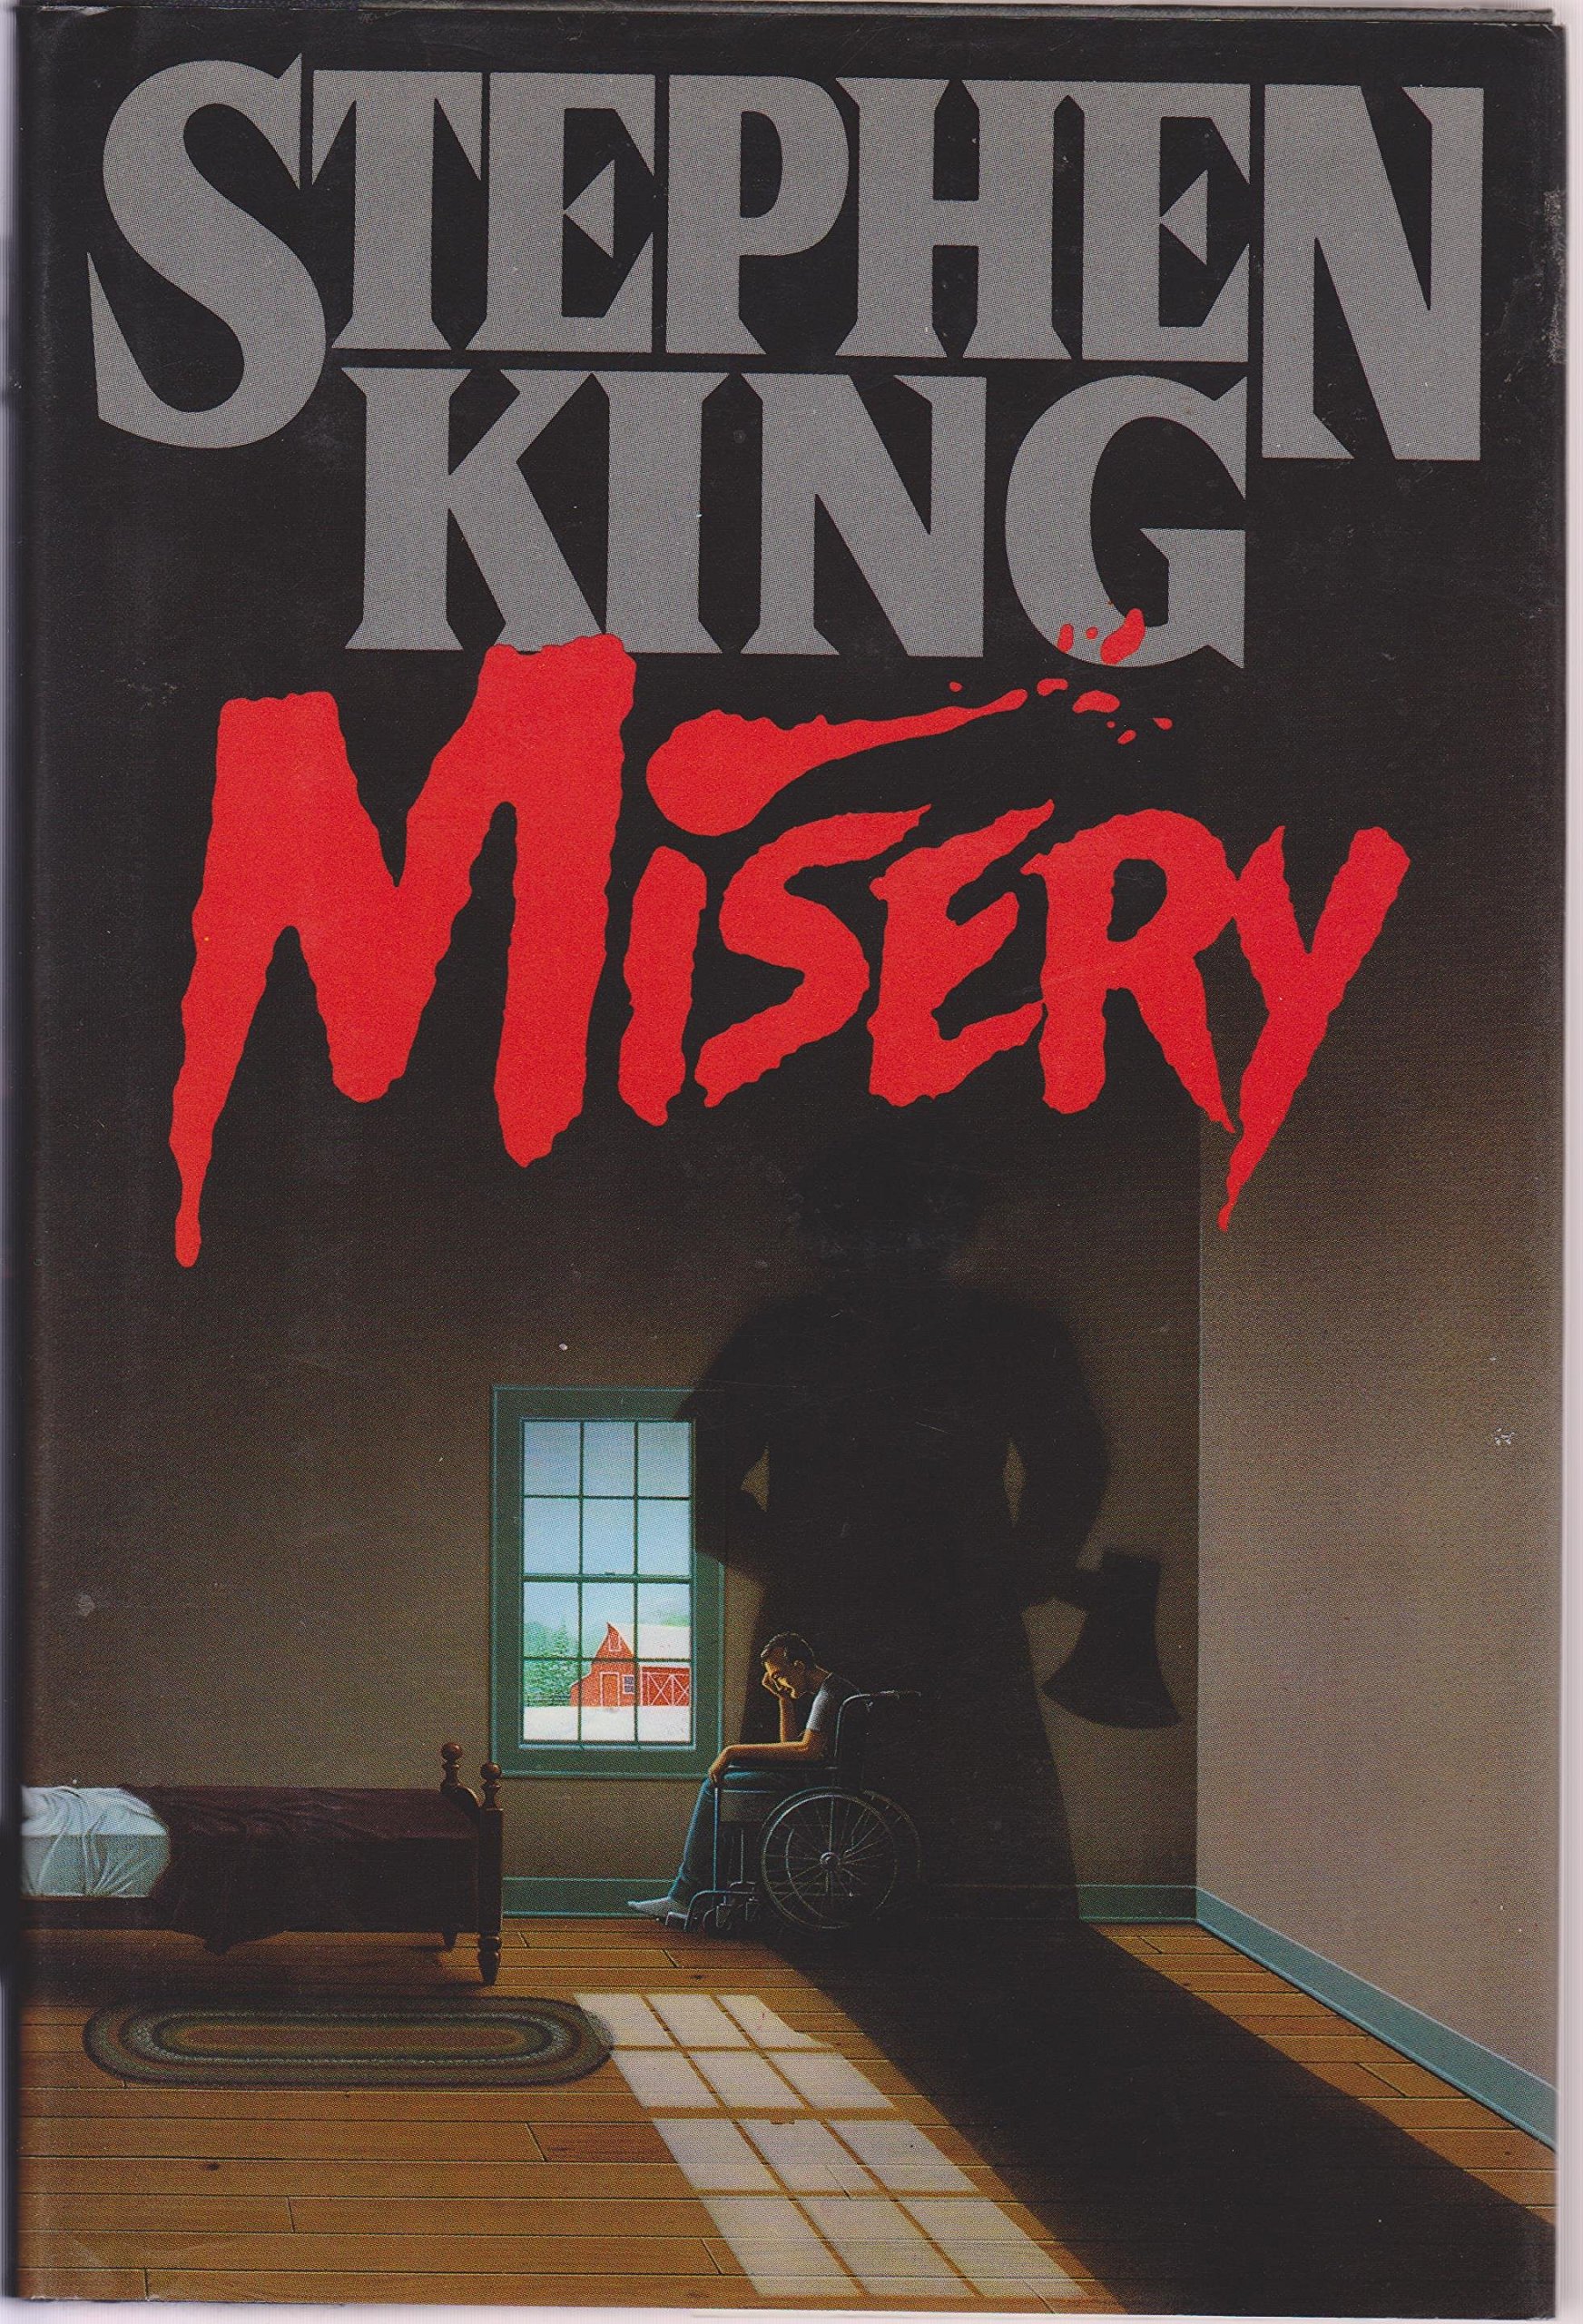 The cover of Stephen King's book "Misery," which does have fanfiction written about it.